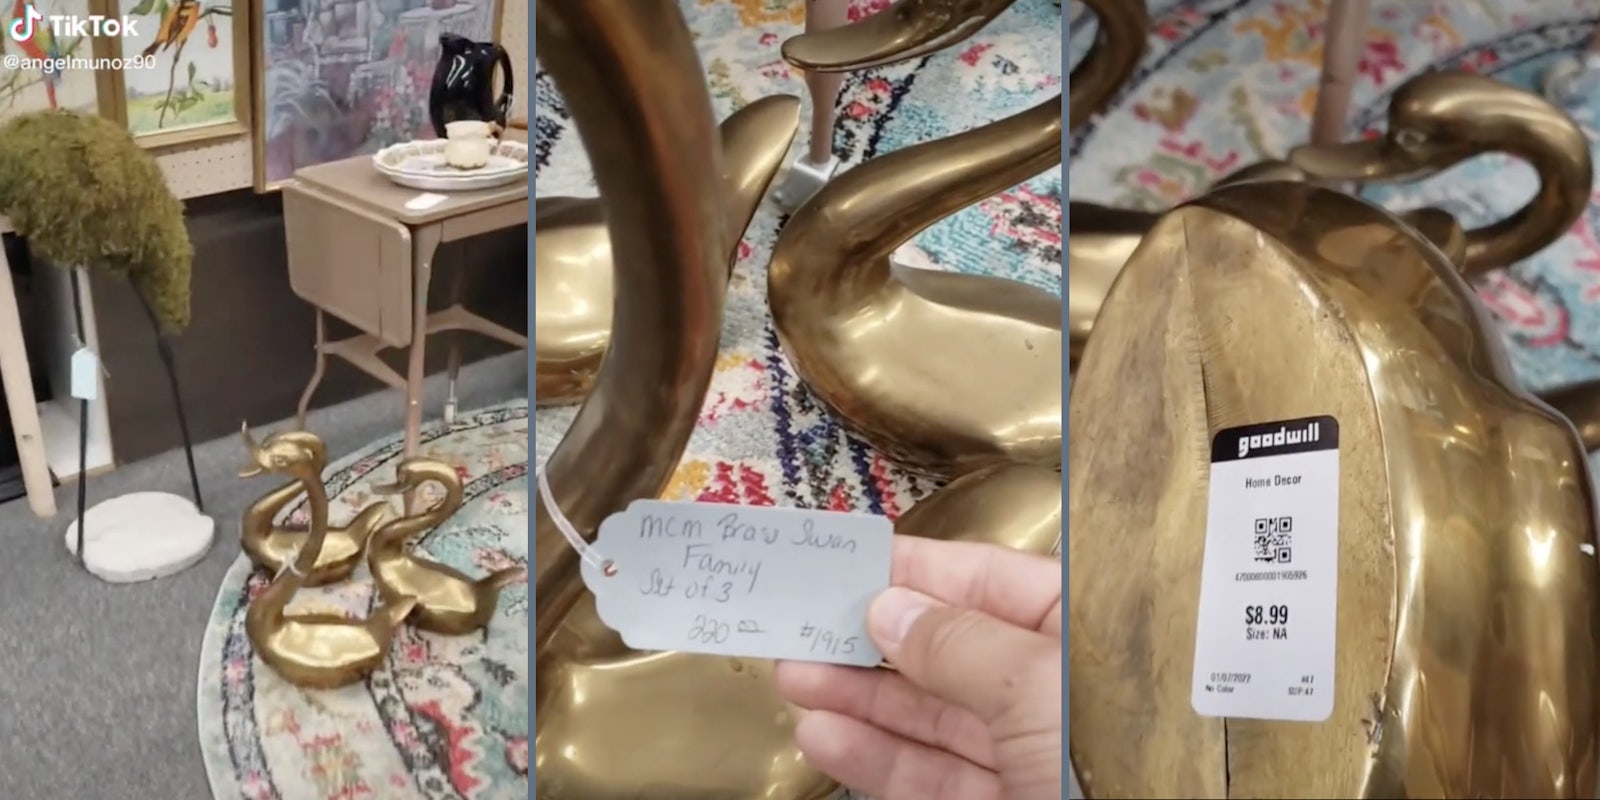 Brass swans (L), price tag for $220 (M), Goodwill price tag for $8.99 (R)